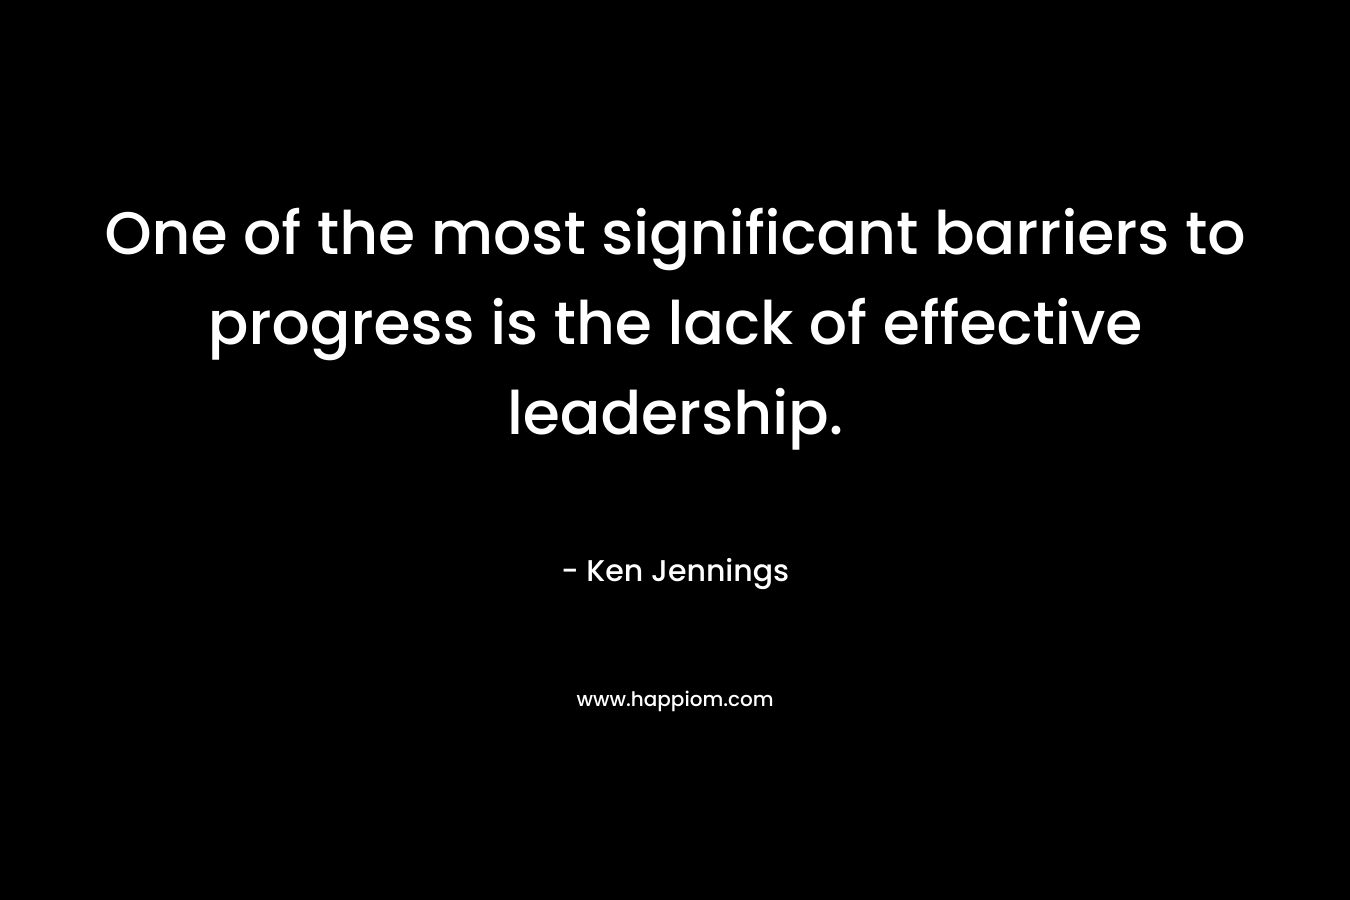 One of the most significant barriers to progress is the lack of effective leadership.